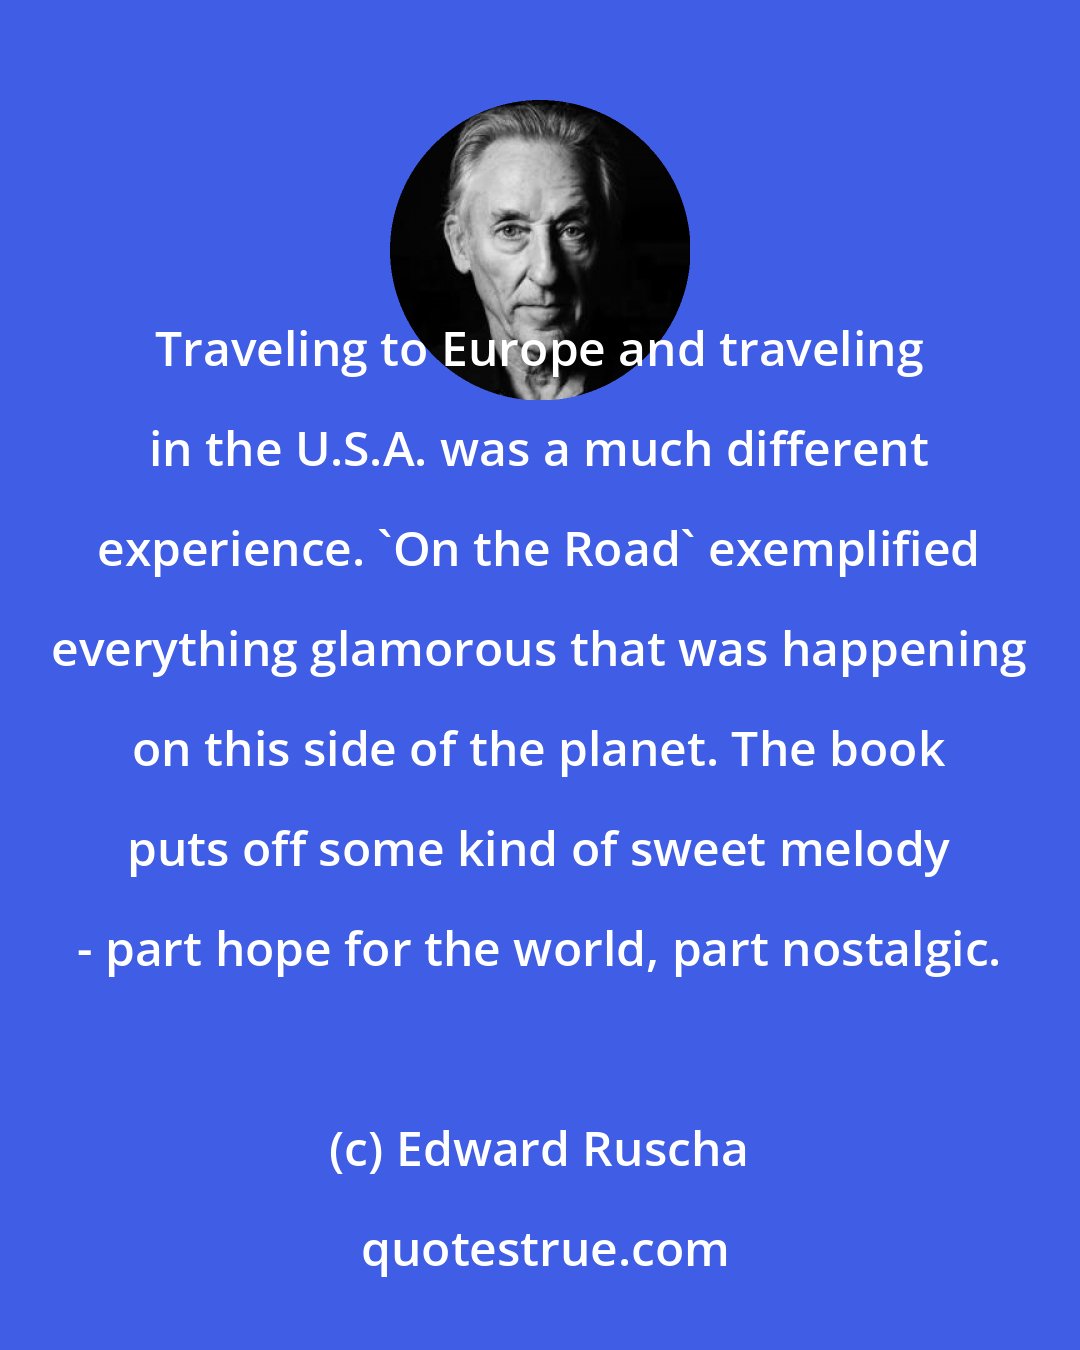 Edward Ruscha: Traveling to Europe and traveling in the U.S.A. was a much different experience. 'On the Road' exemplified everything glamorous that was happening on this side of the planet. The book puts off some kind of sweet melody - part hope for the world, part nostalgic.